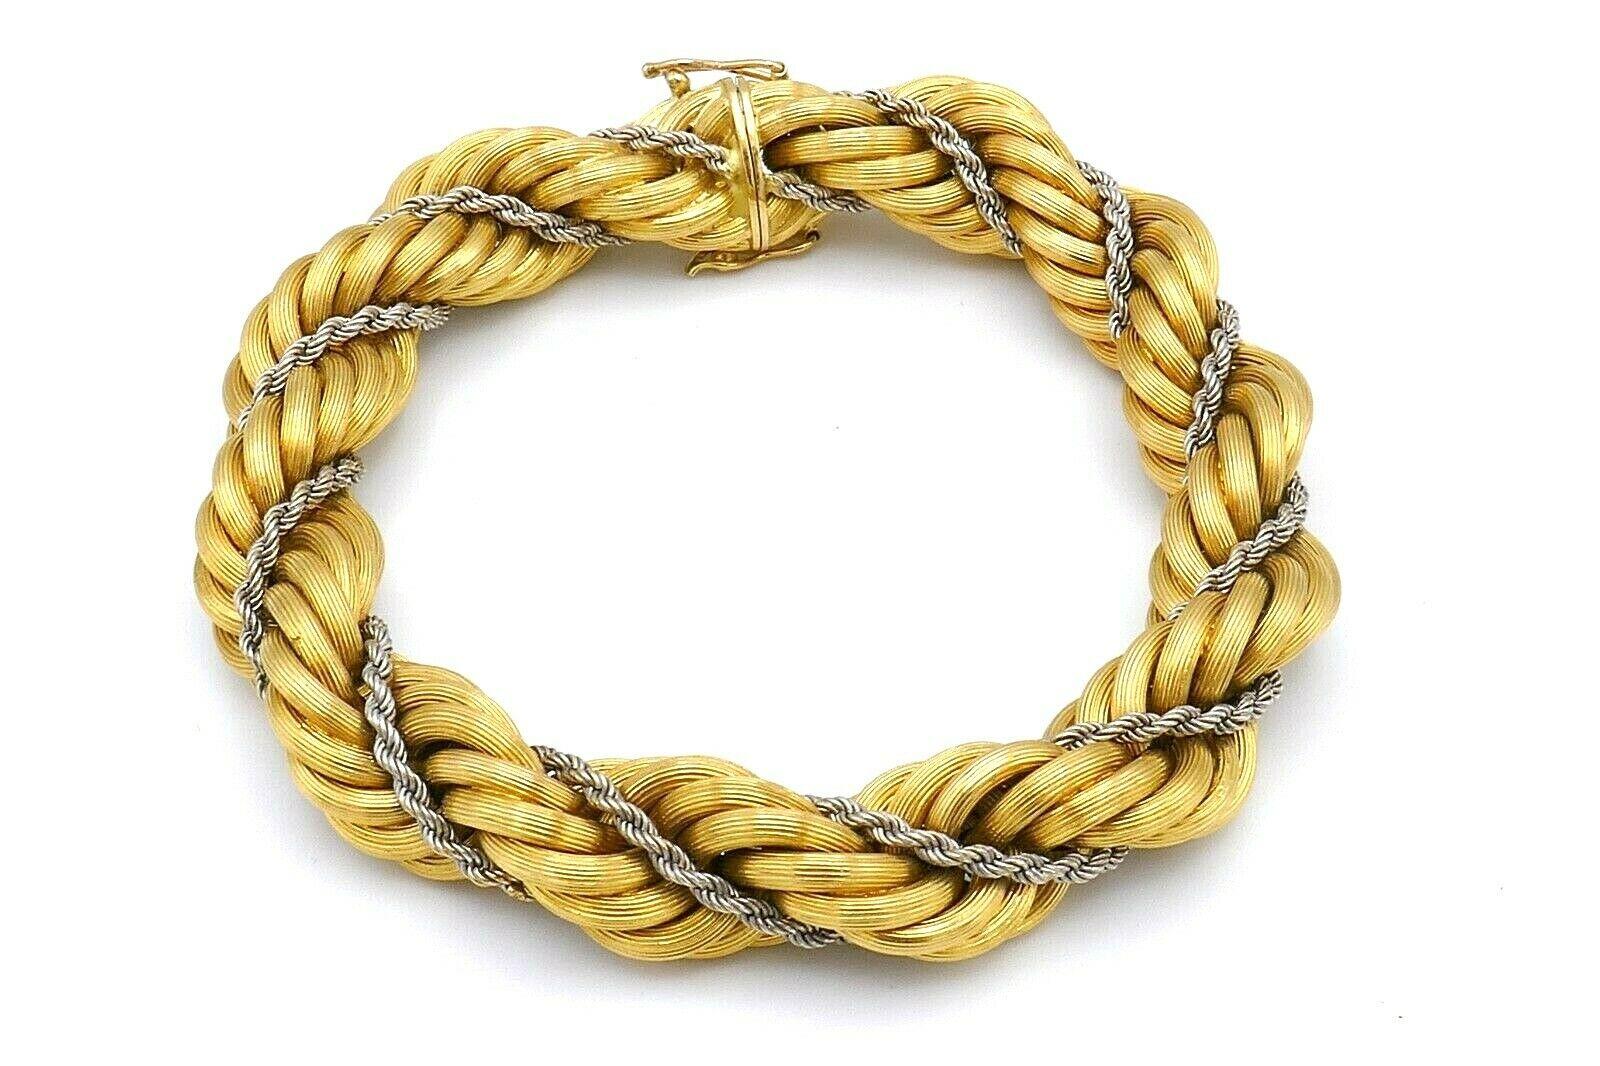 Women's or Men's Vintage Rope Chain Two-Tone Gold Bracelet